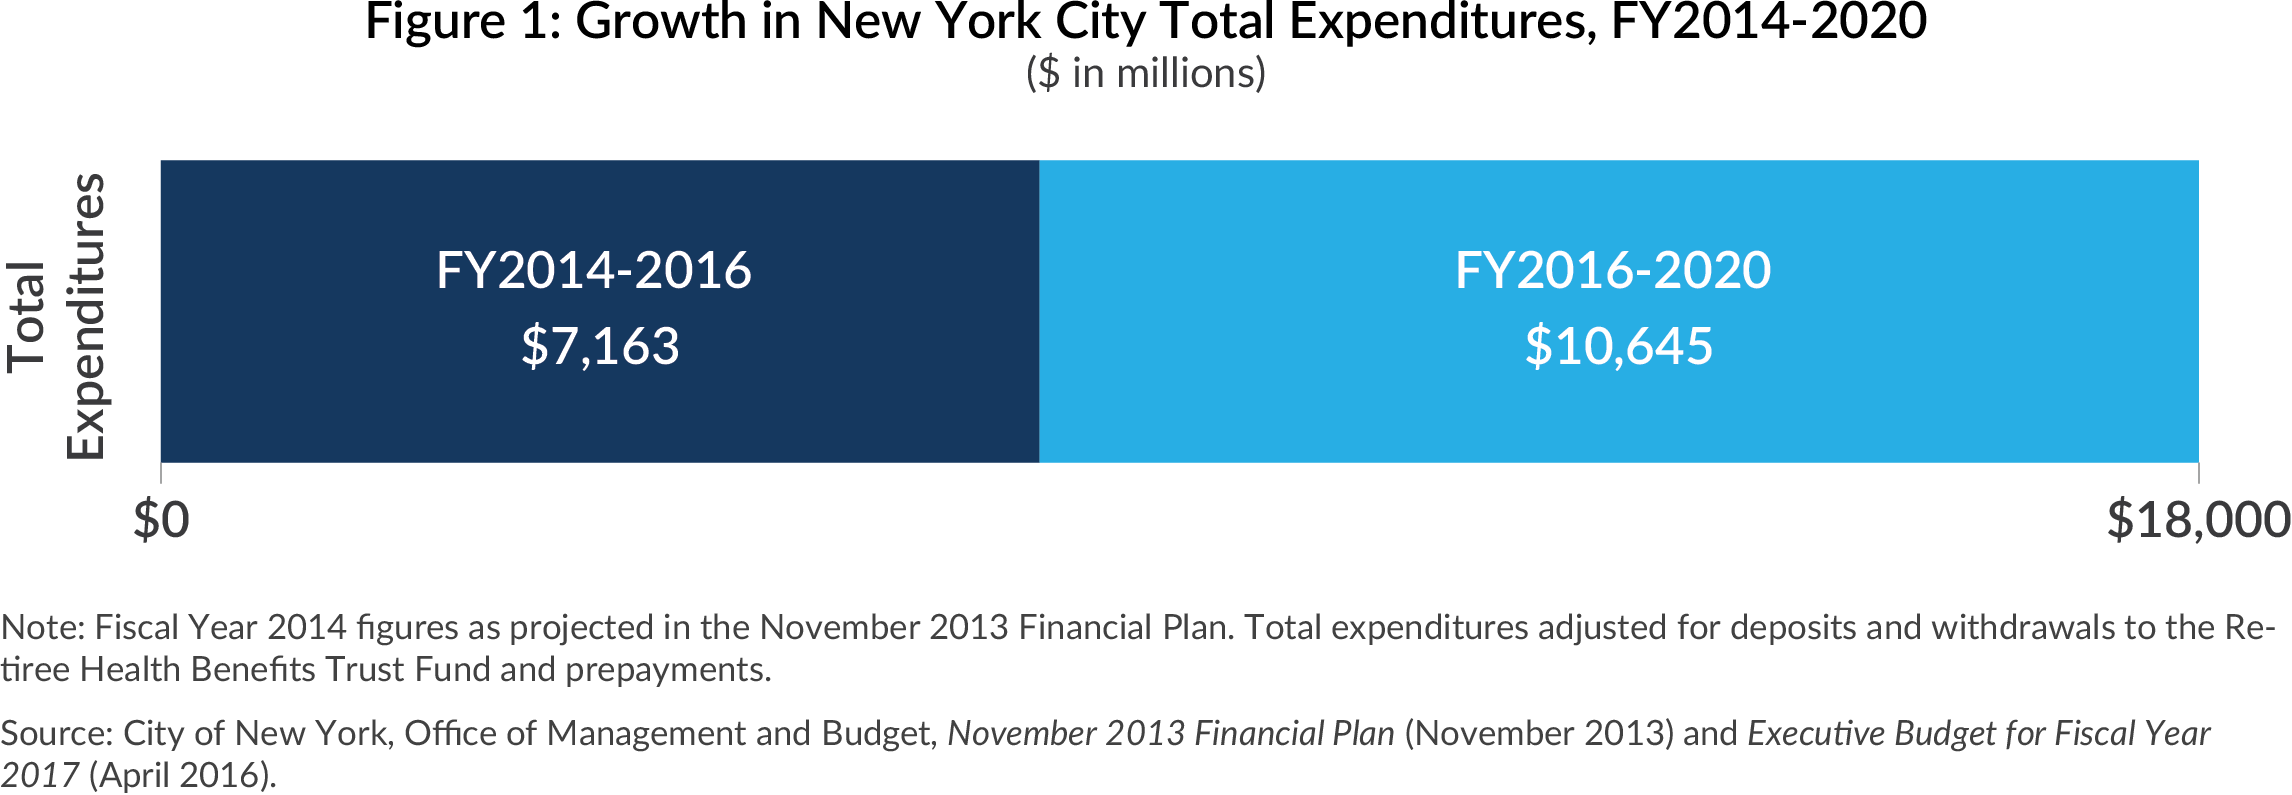 Growth in NYC expenditures, fy2014-2020